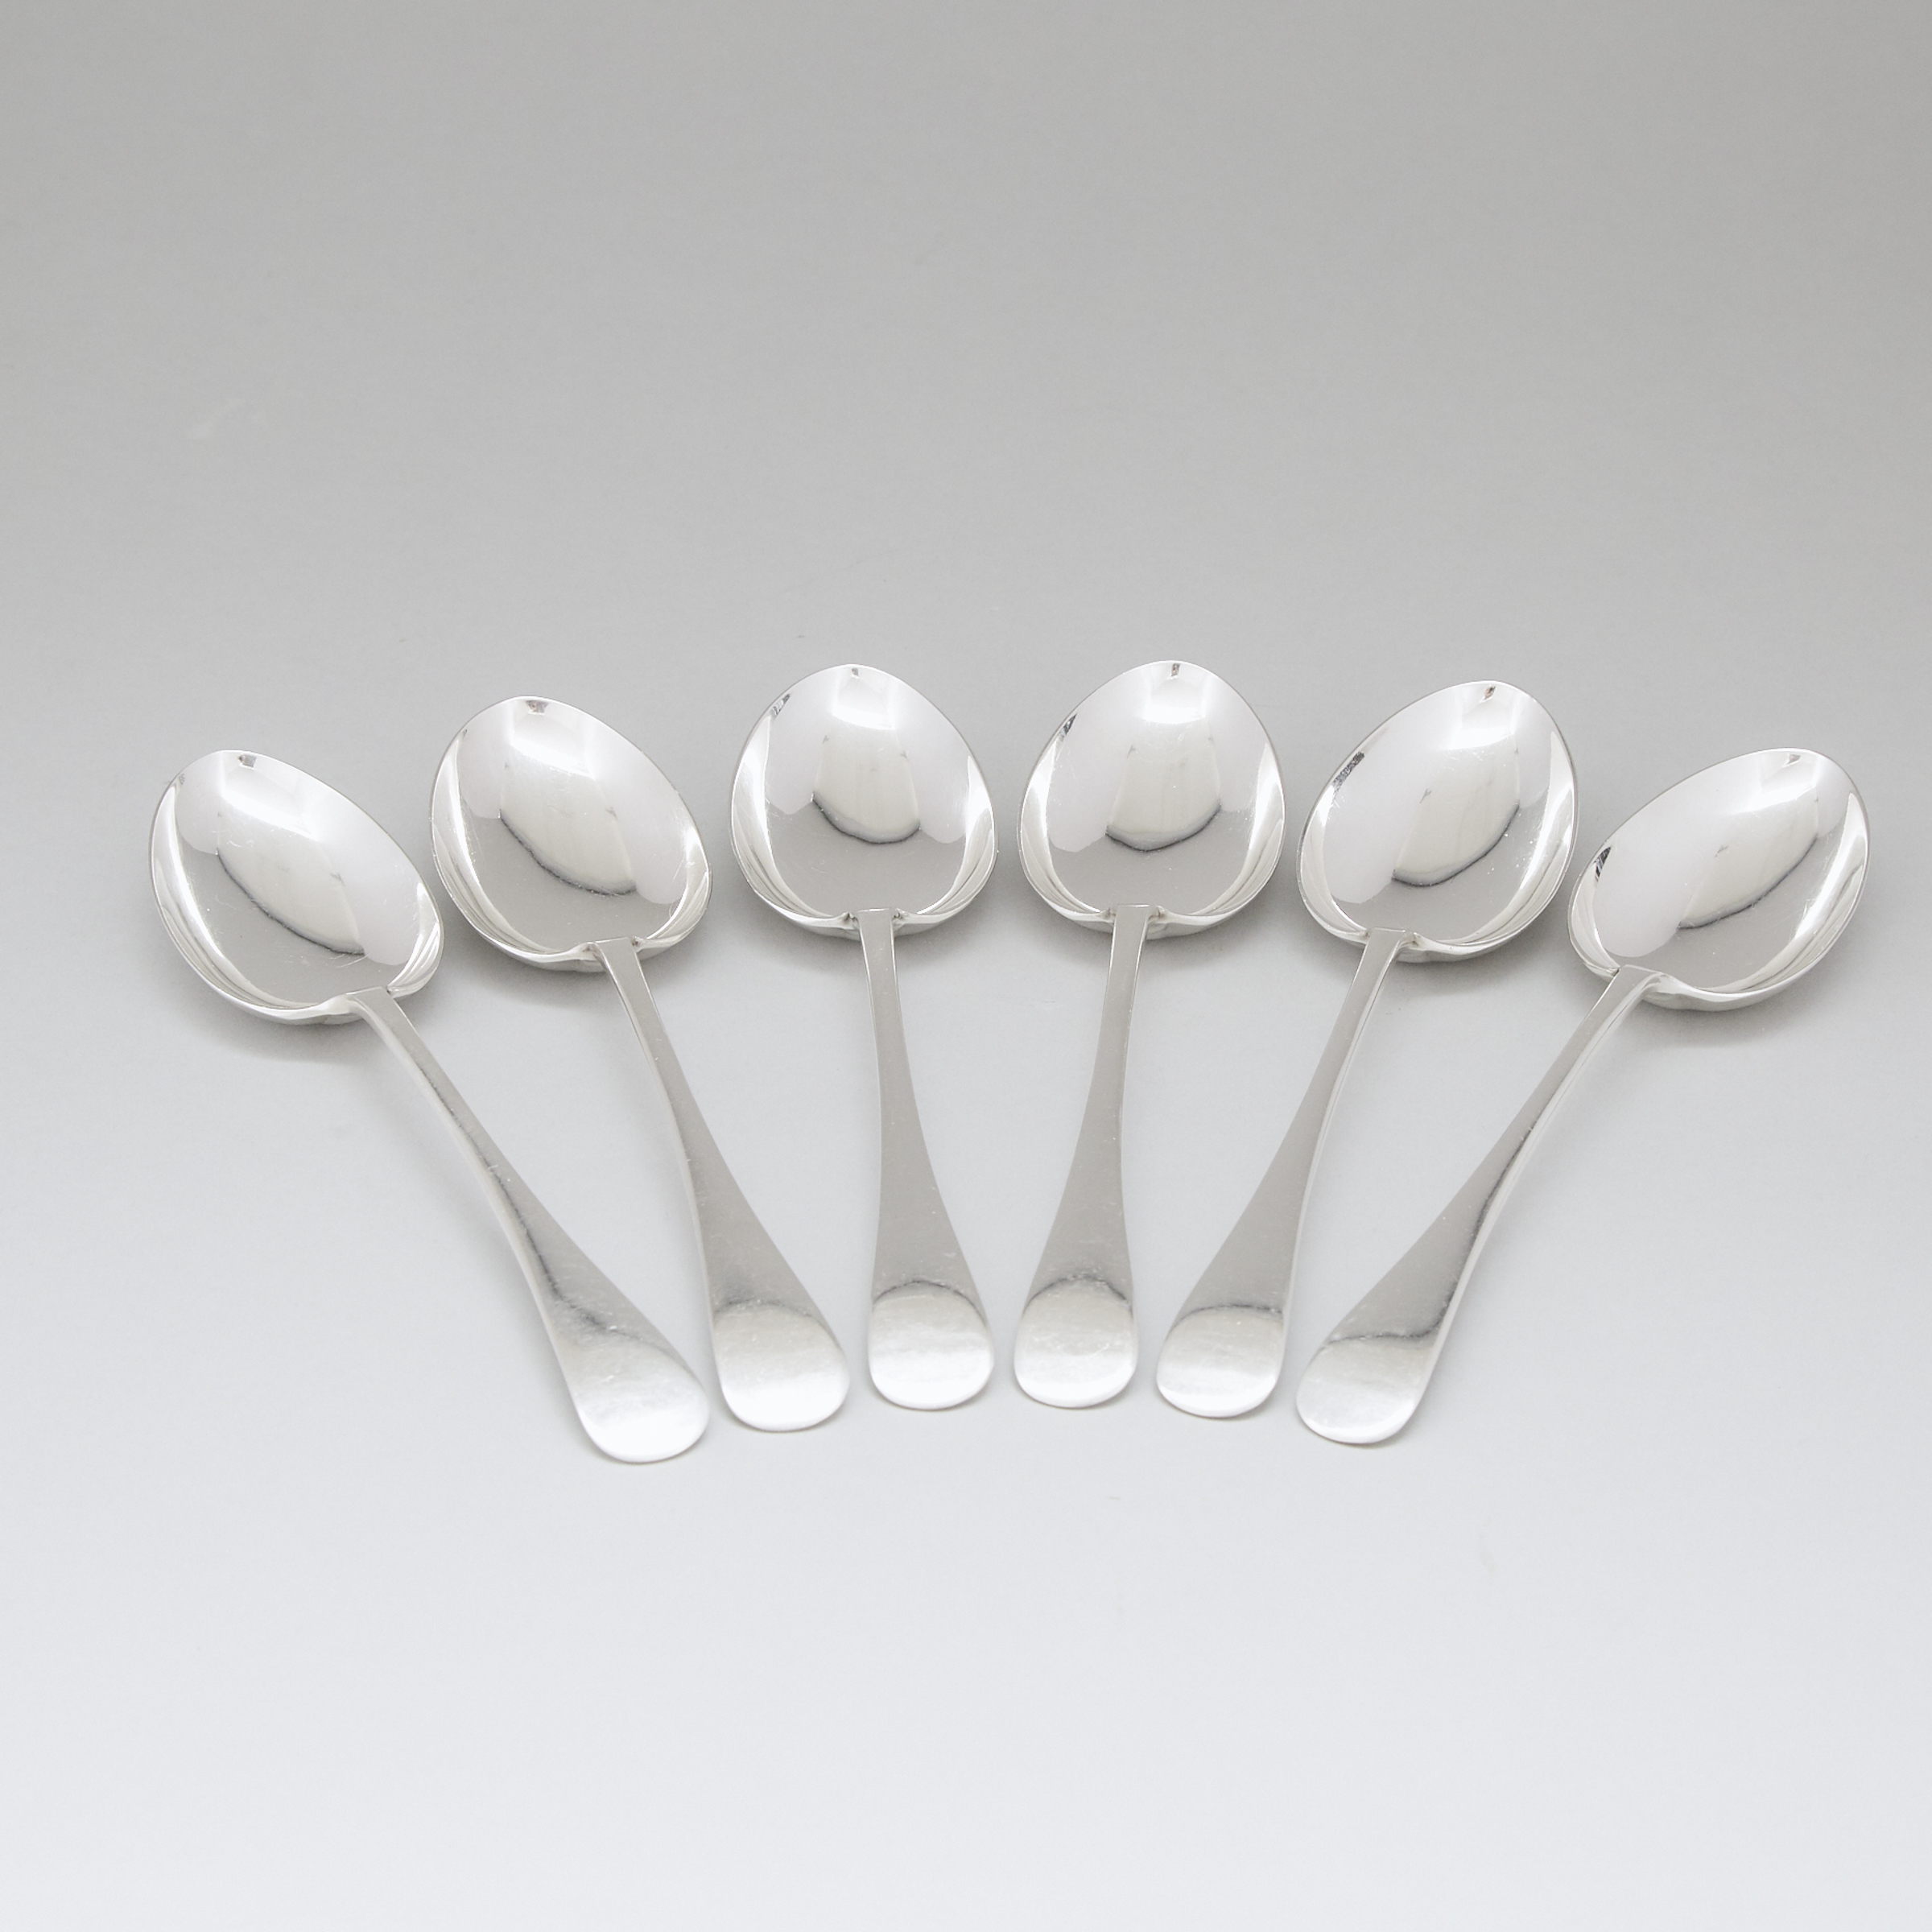 Six English Silver Old English Pattern Table Spoons, Frank Cobb & Co., Sheffield, 1926